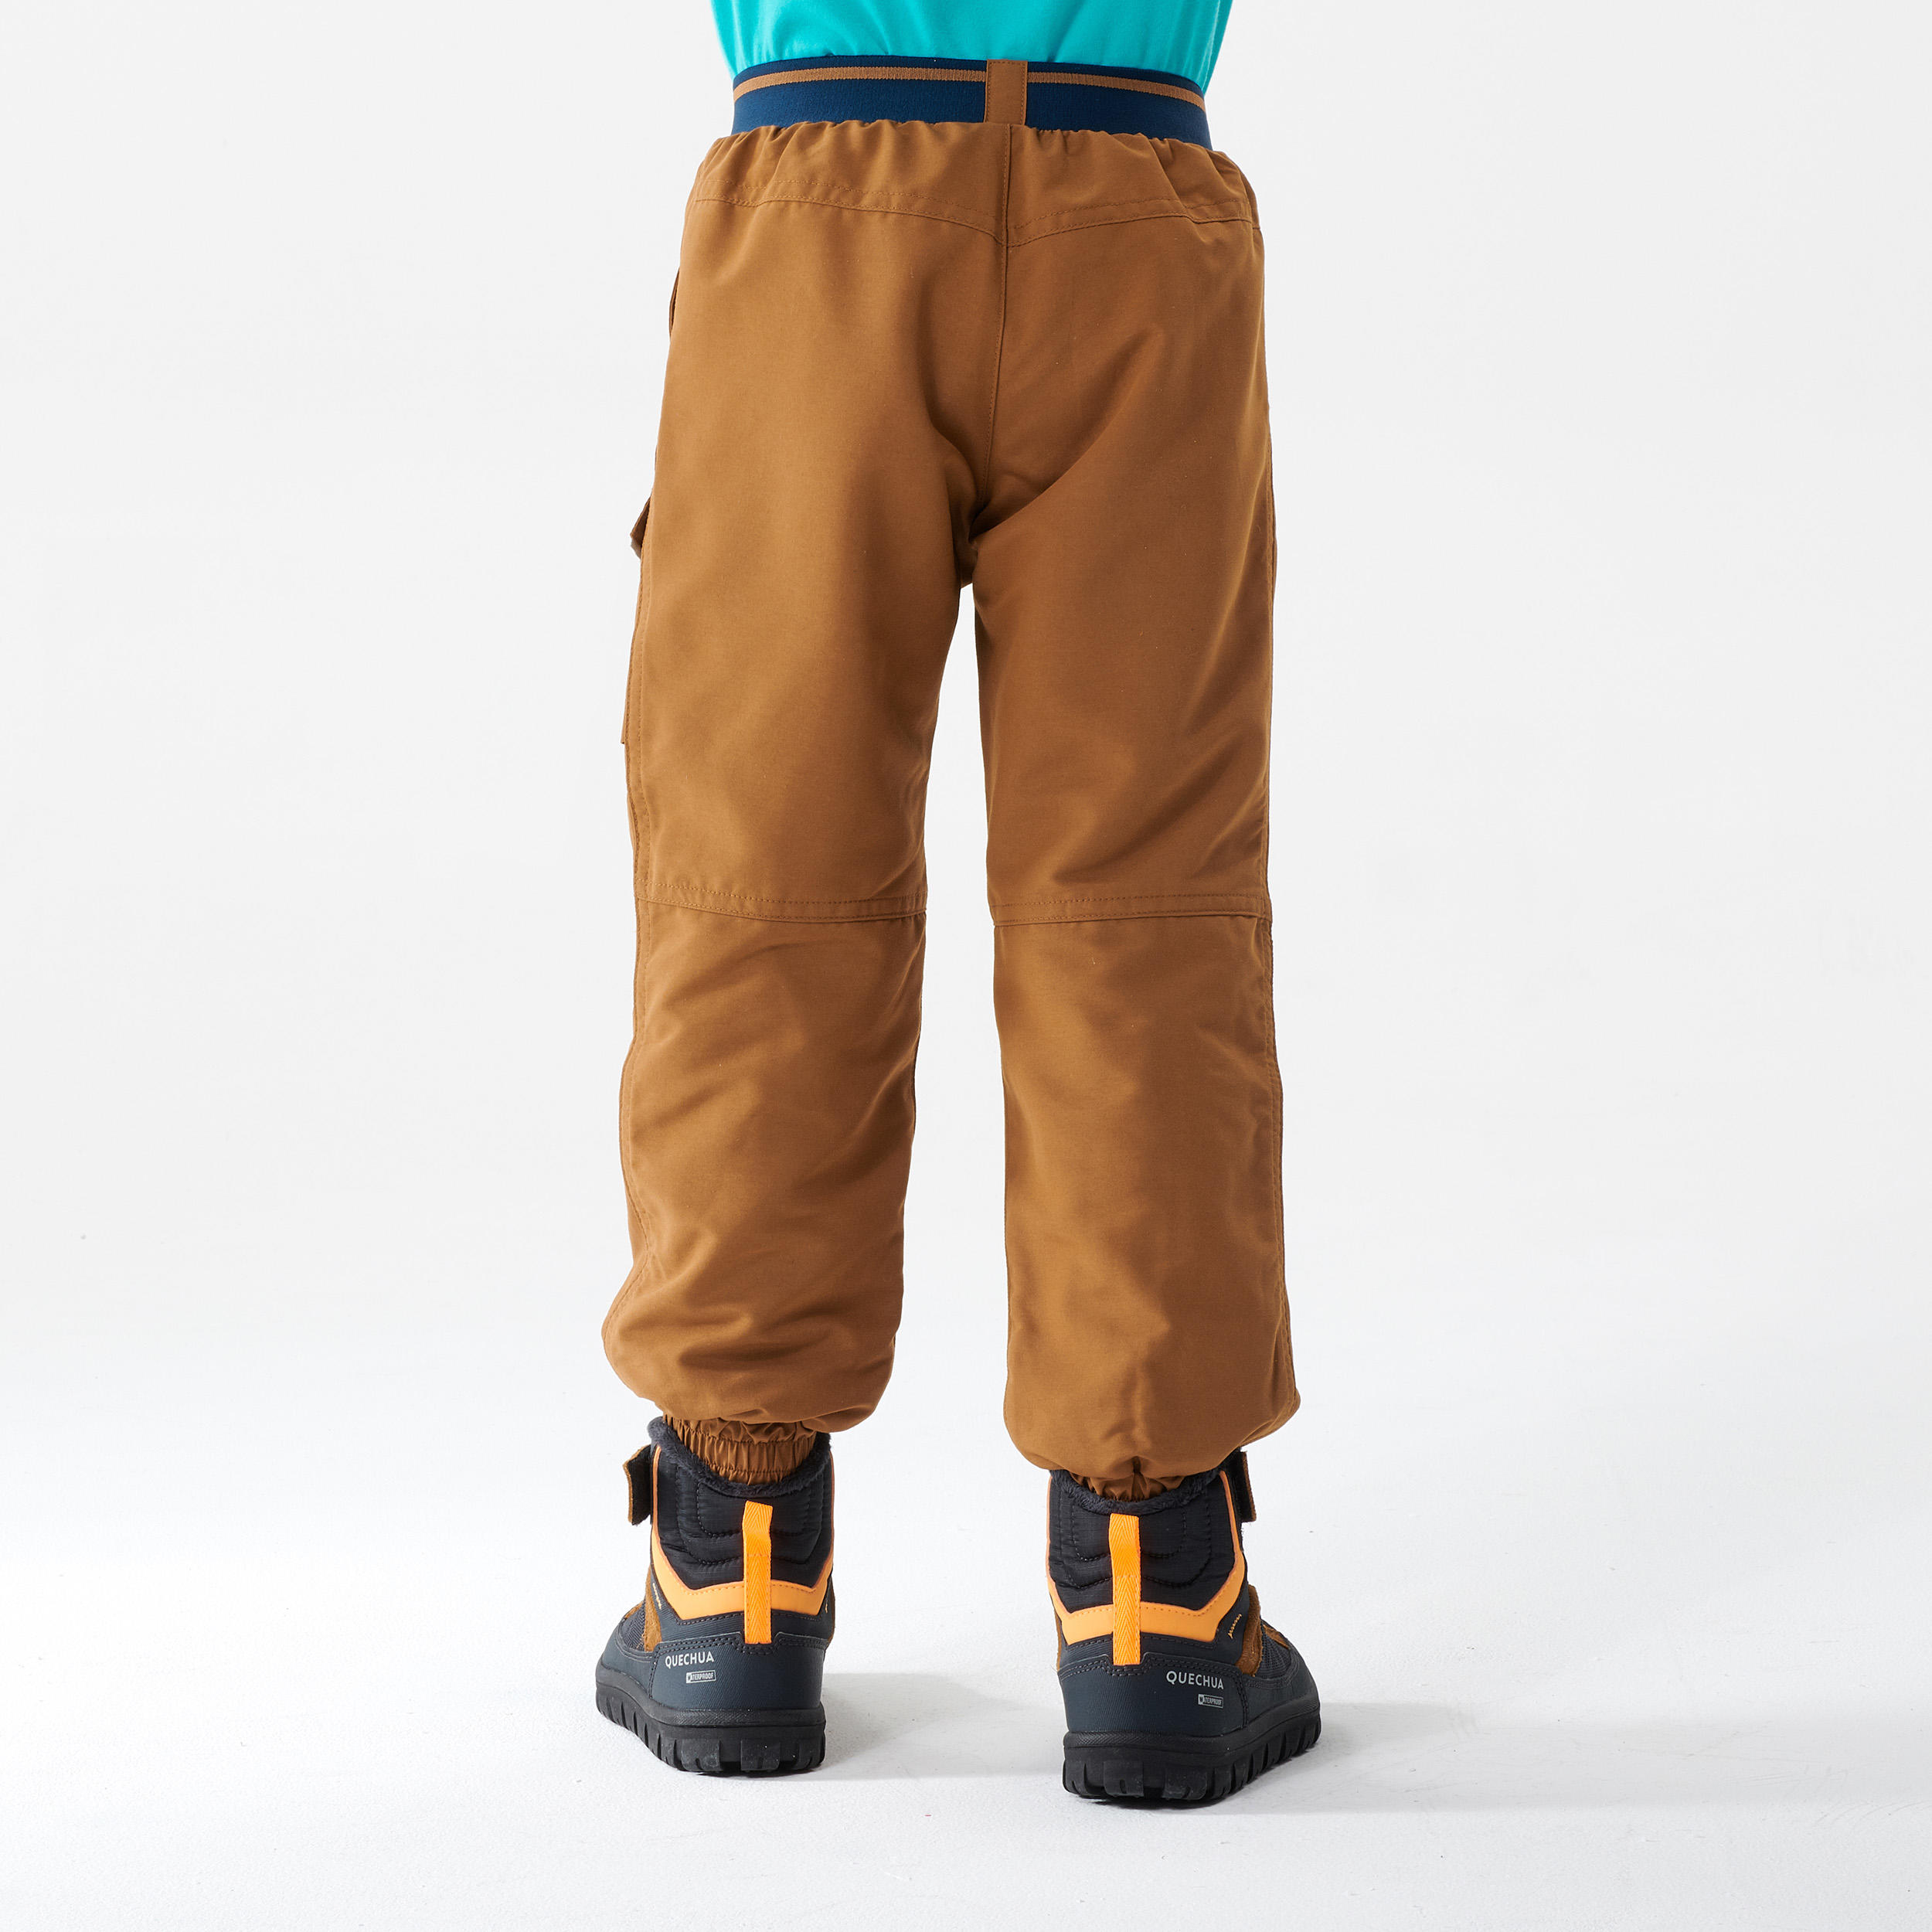 Children's warm water-repellent hiking trousers - SH100 - age 2-6 6/10